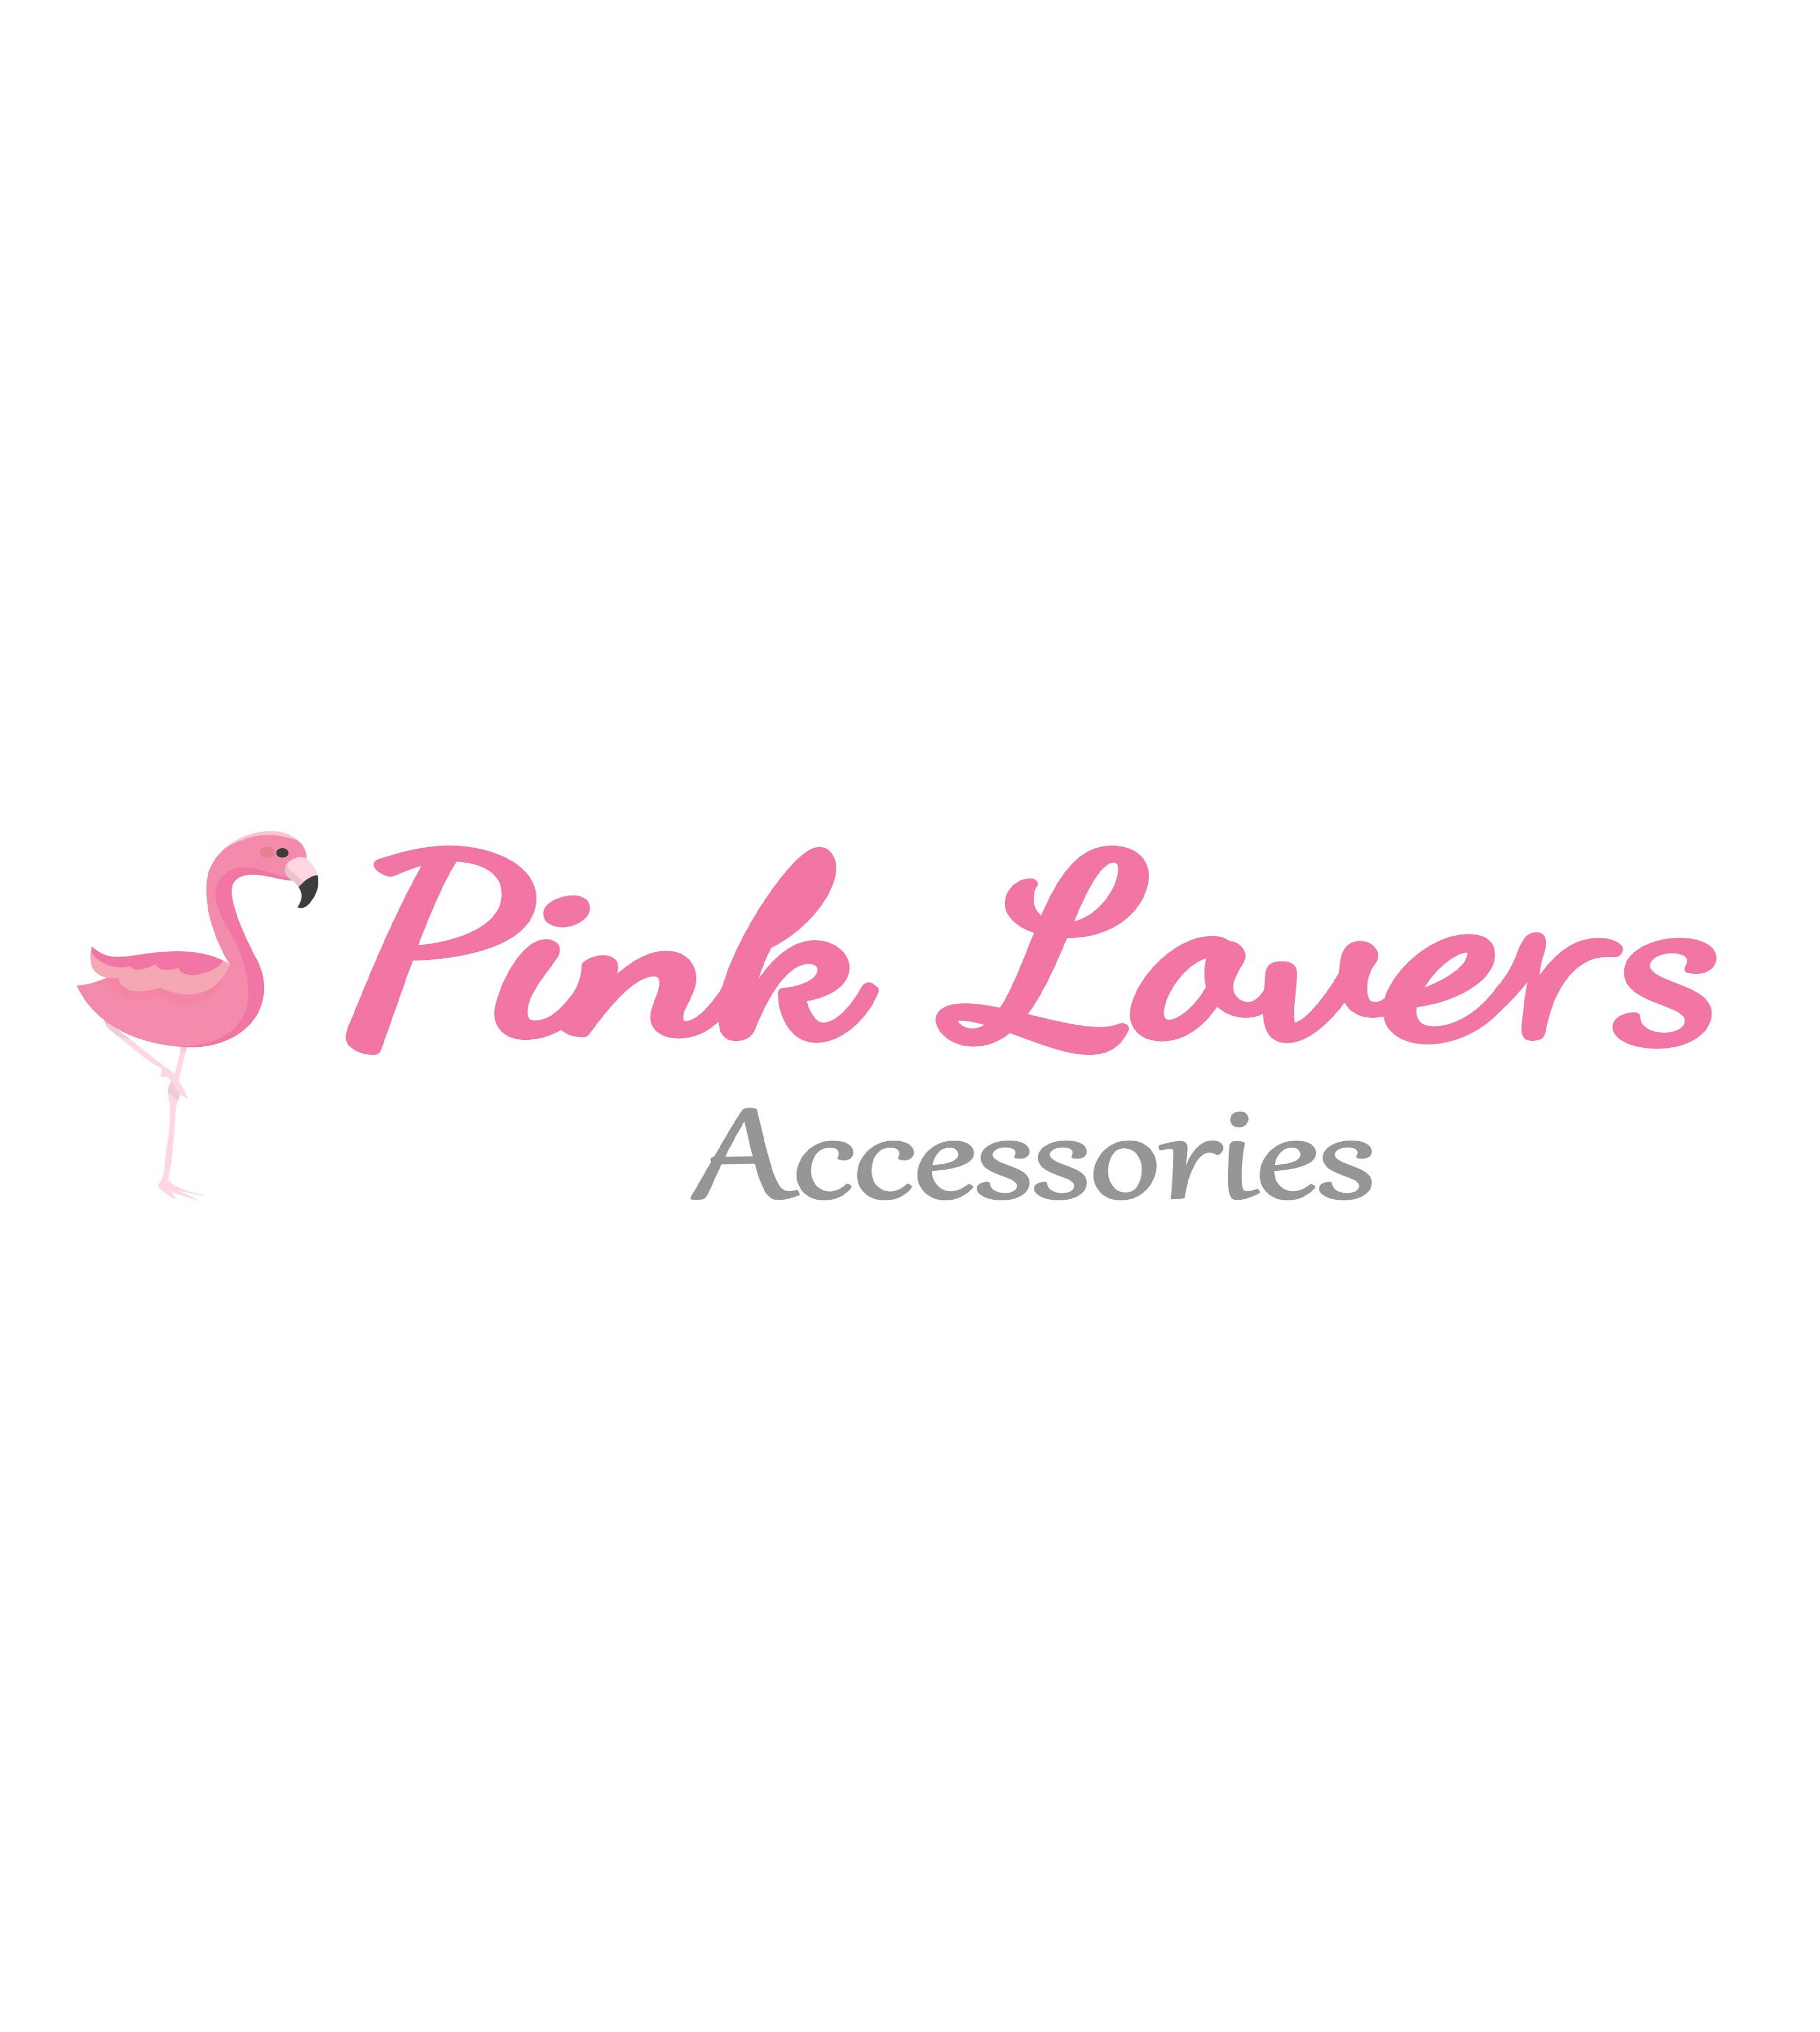 PİNK LOVERS ACCESSORIES